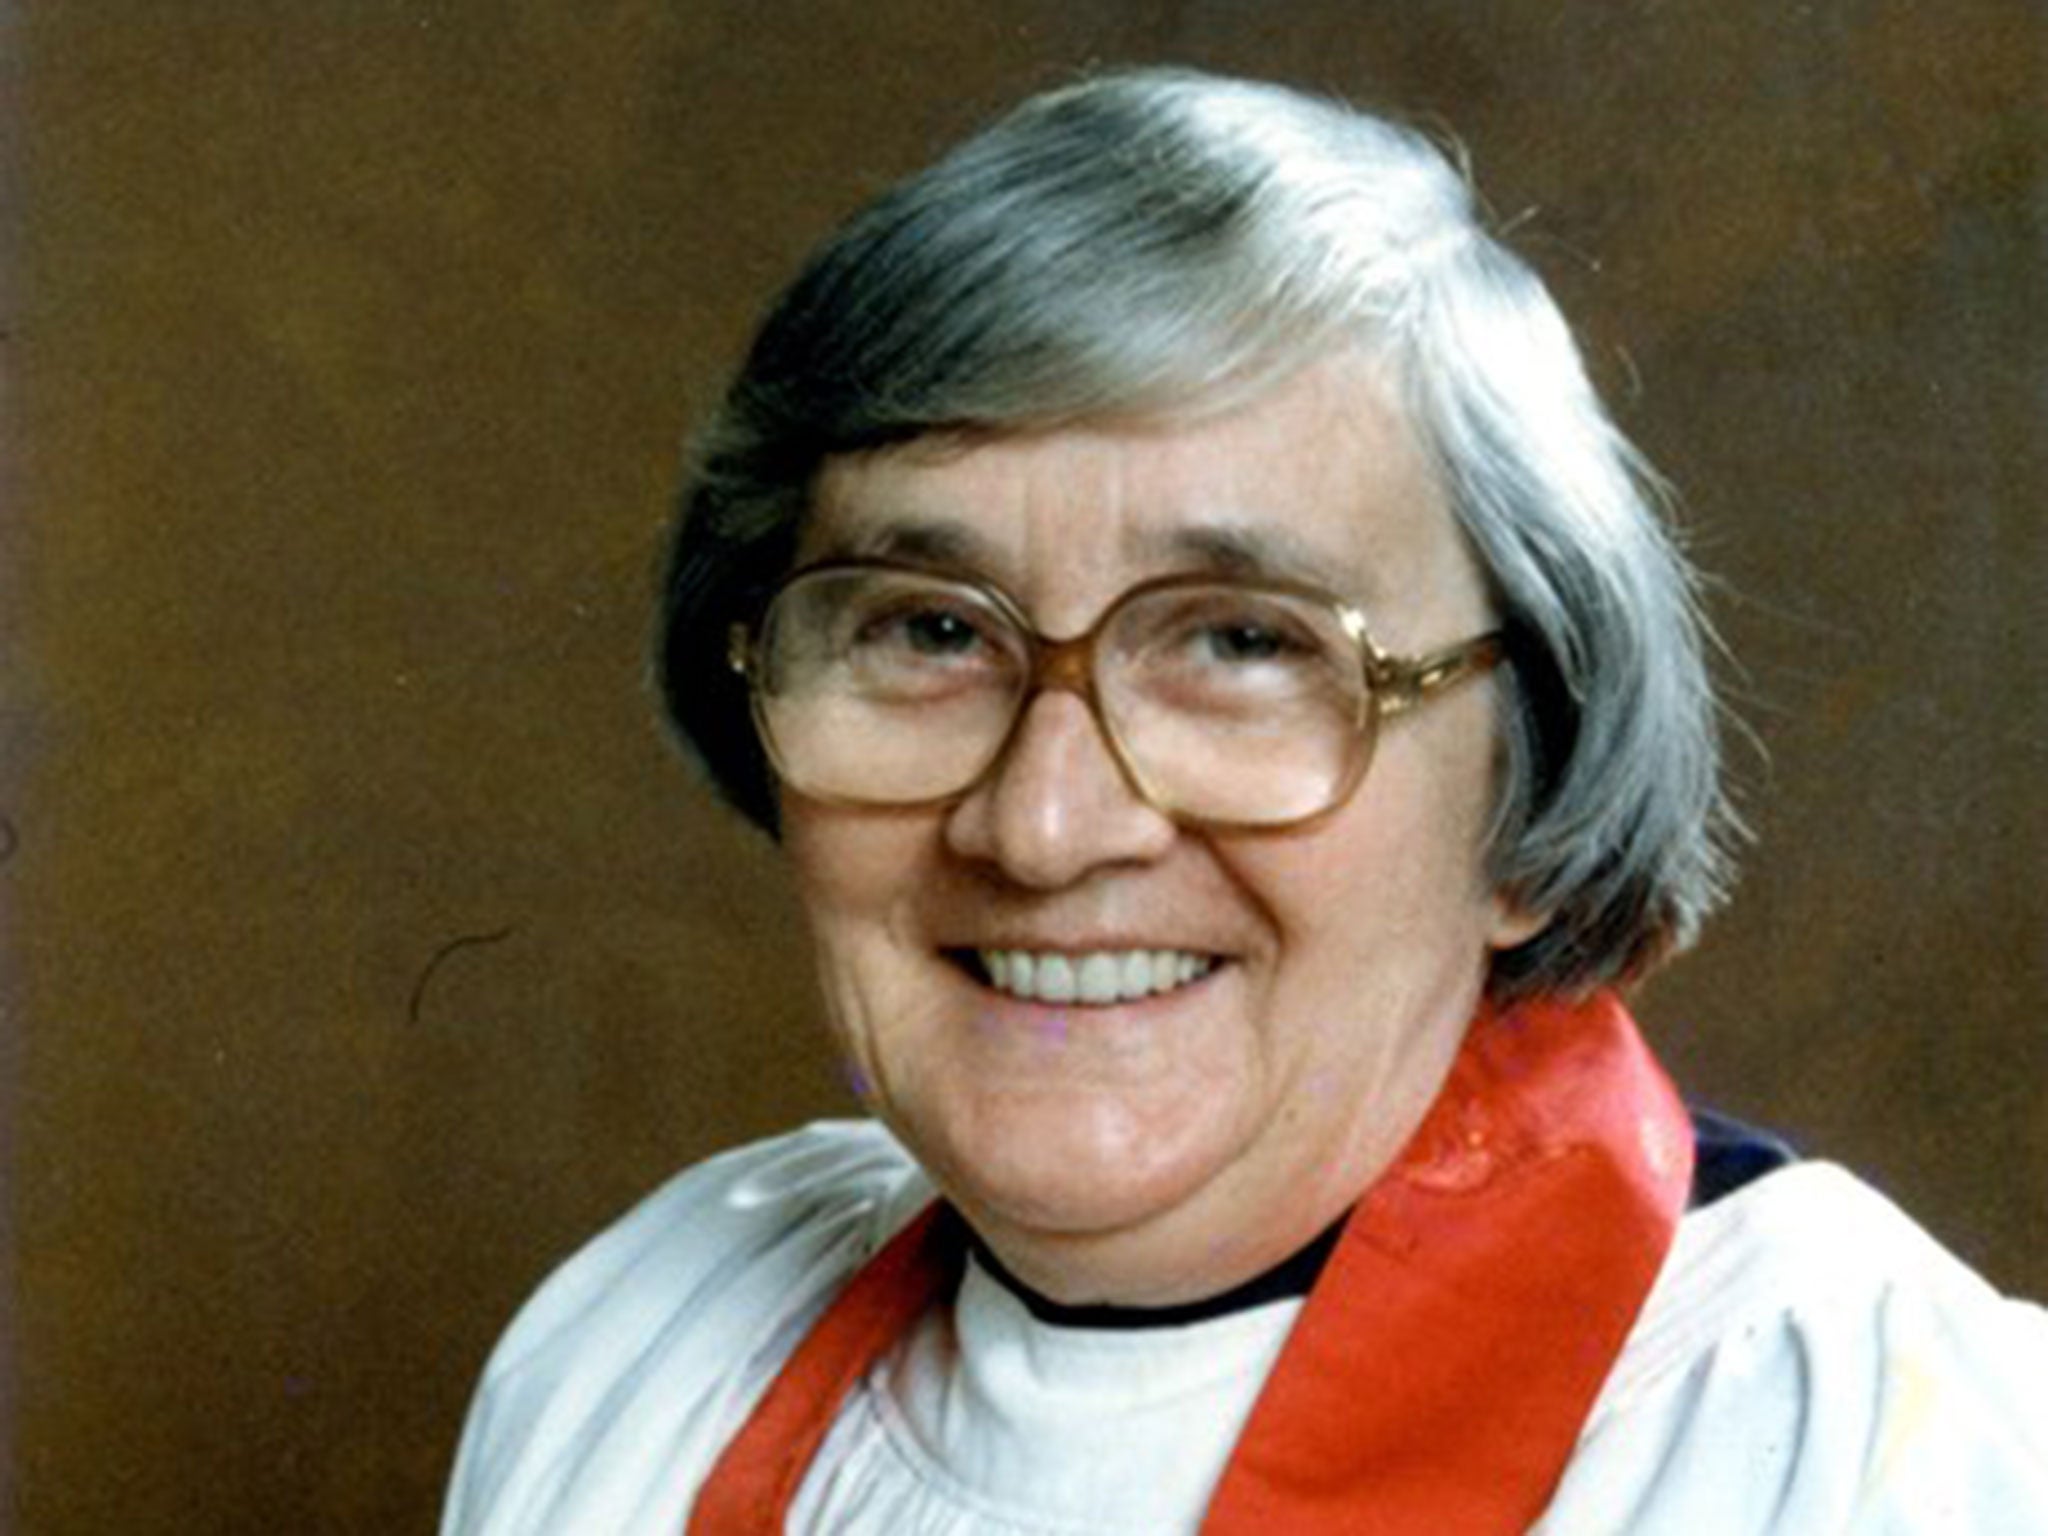 Joyce Bennett became a priest in Hong Kong in 1971 after training as a missionary